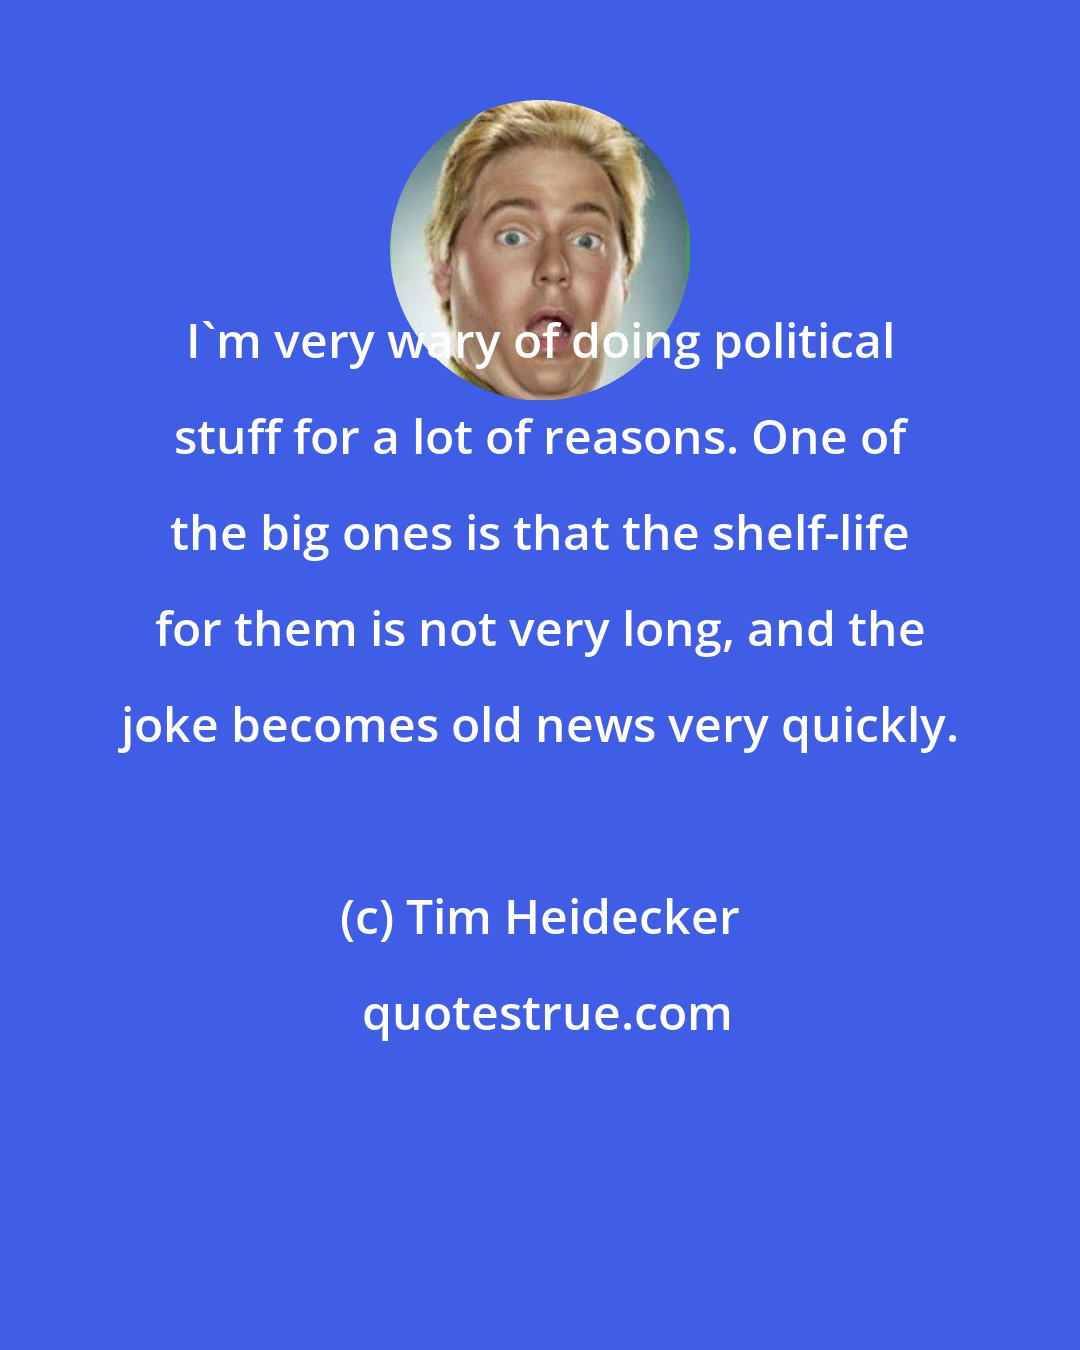 Tim Heidecker: I'm very wary of doing political stuff for a lot of reasons. One of the big ones is that the shelf-life for them is not very long, and the joke becomes old news very quickly.